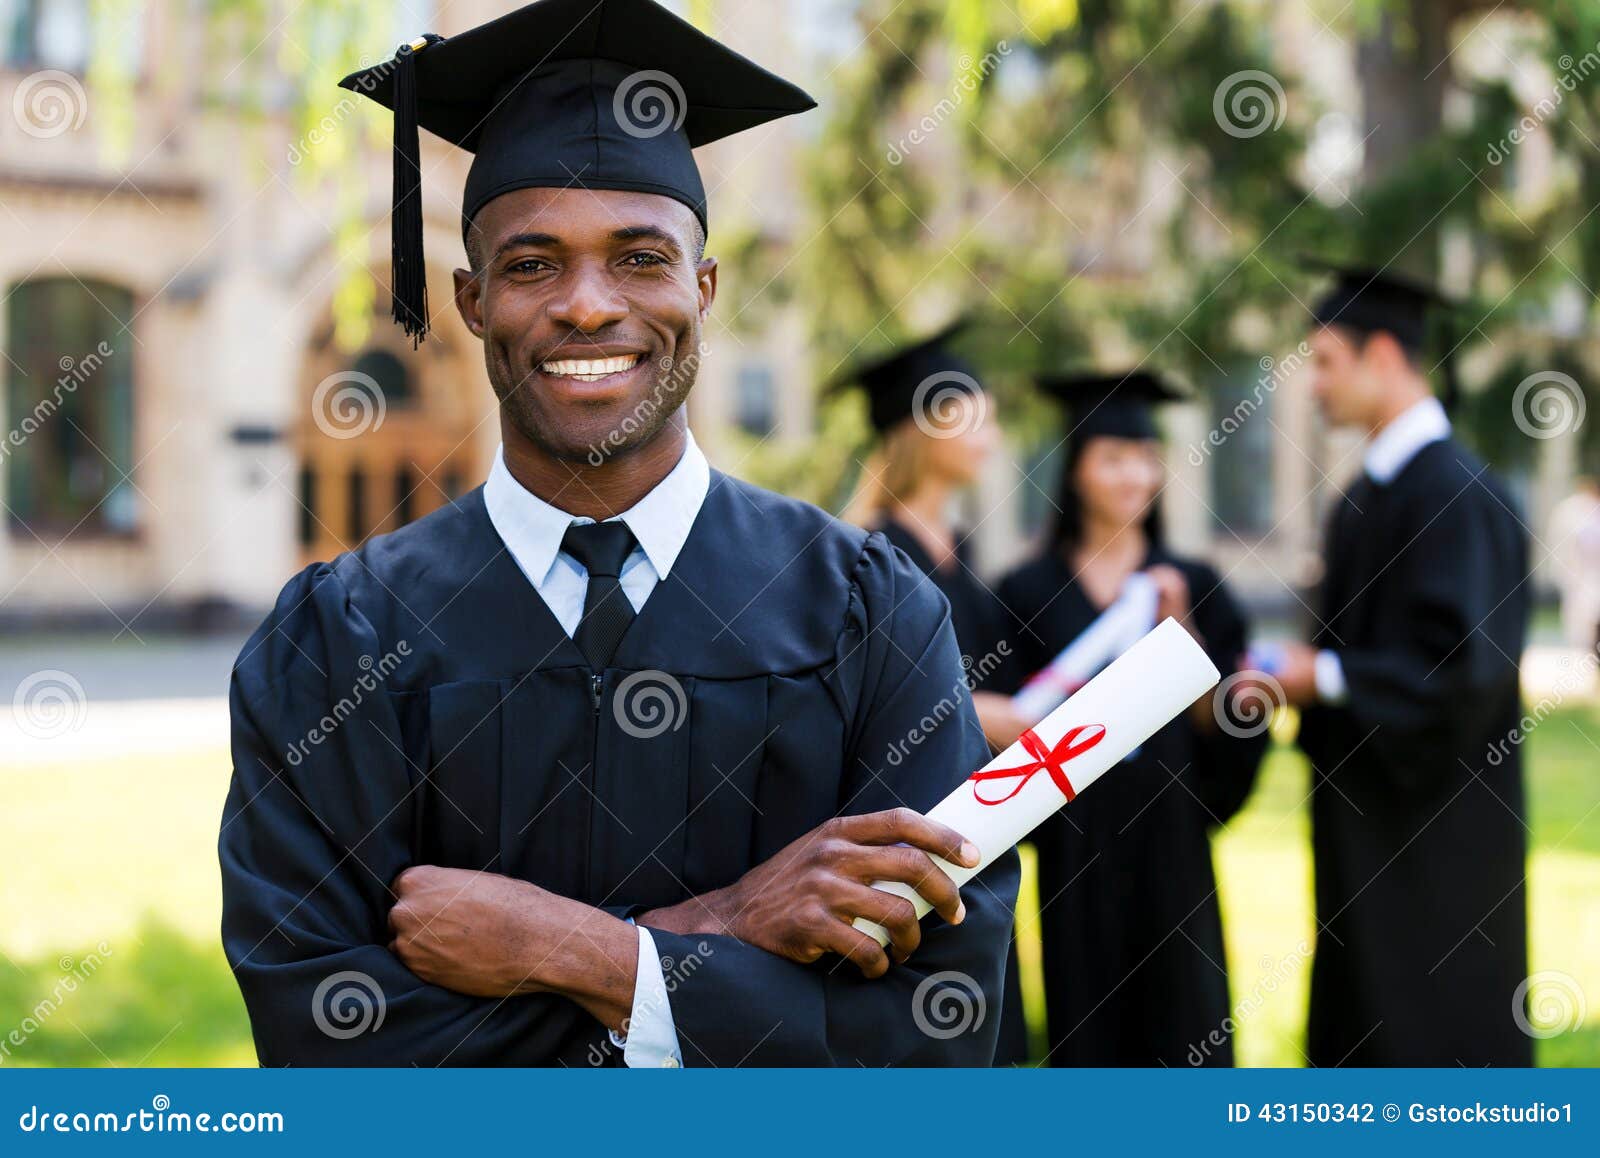 Graduation Outfits Men Cap And Gown Photos, Download The BEST Free  Graduation Outfits Men Cap And Gown Stock Photos & HD Images